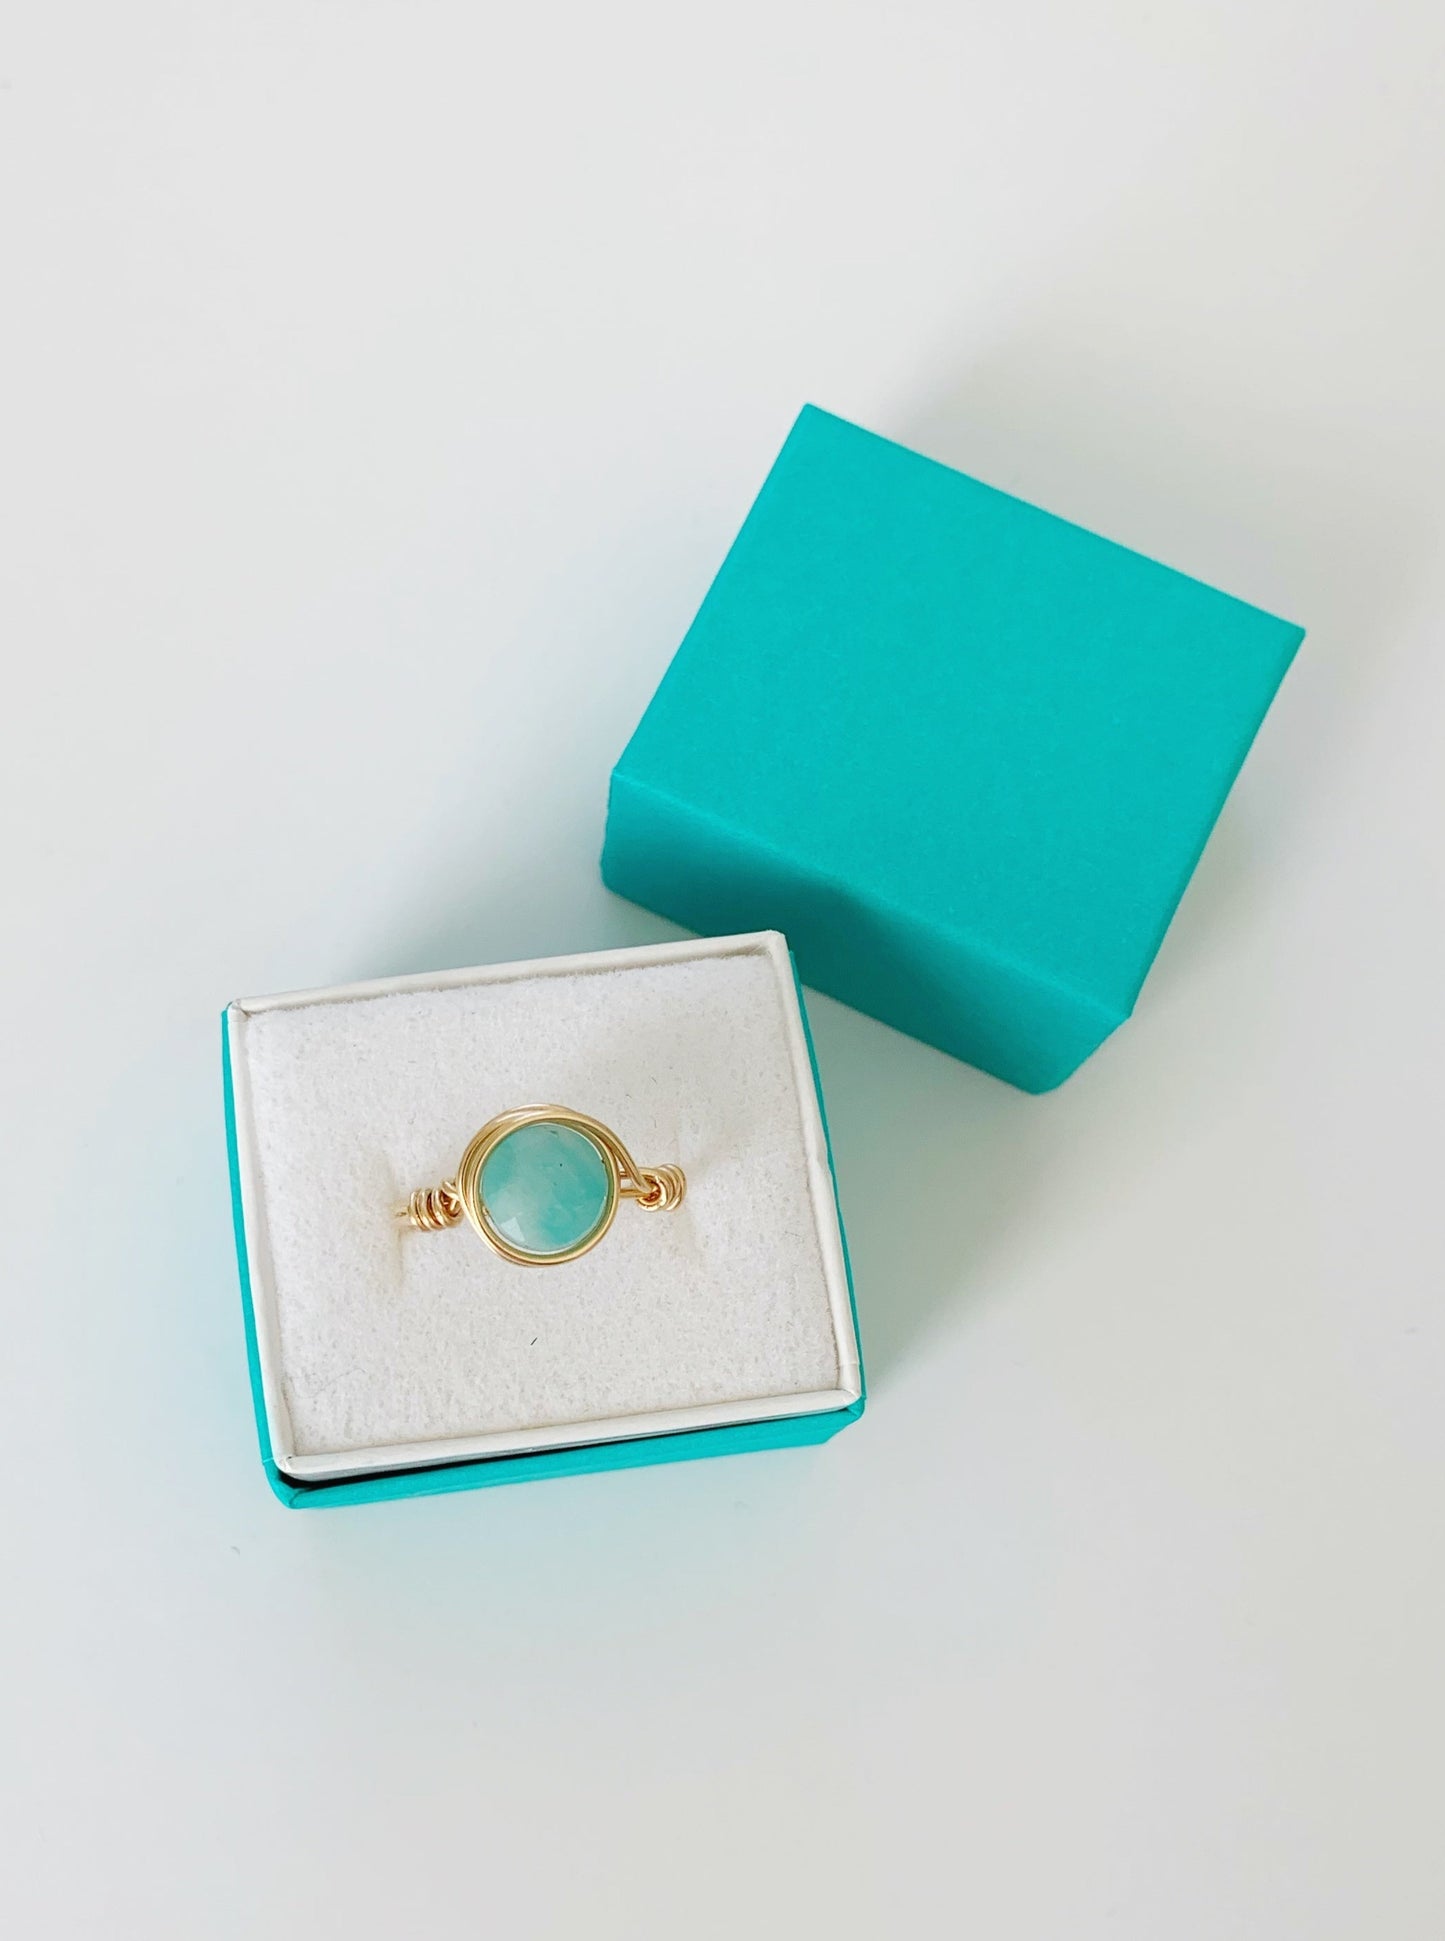 Mermaids and madeleines Captiva ring is a 14k gold wire wrapped ring with amazonite gem. This ring is photographed in a teal gift box on a white surface